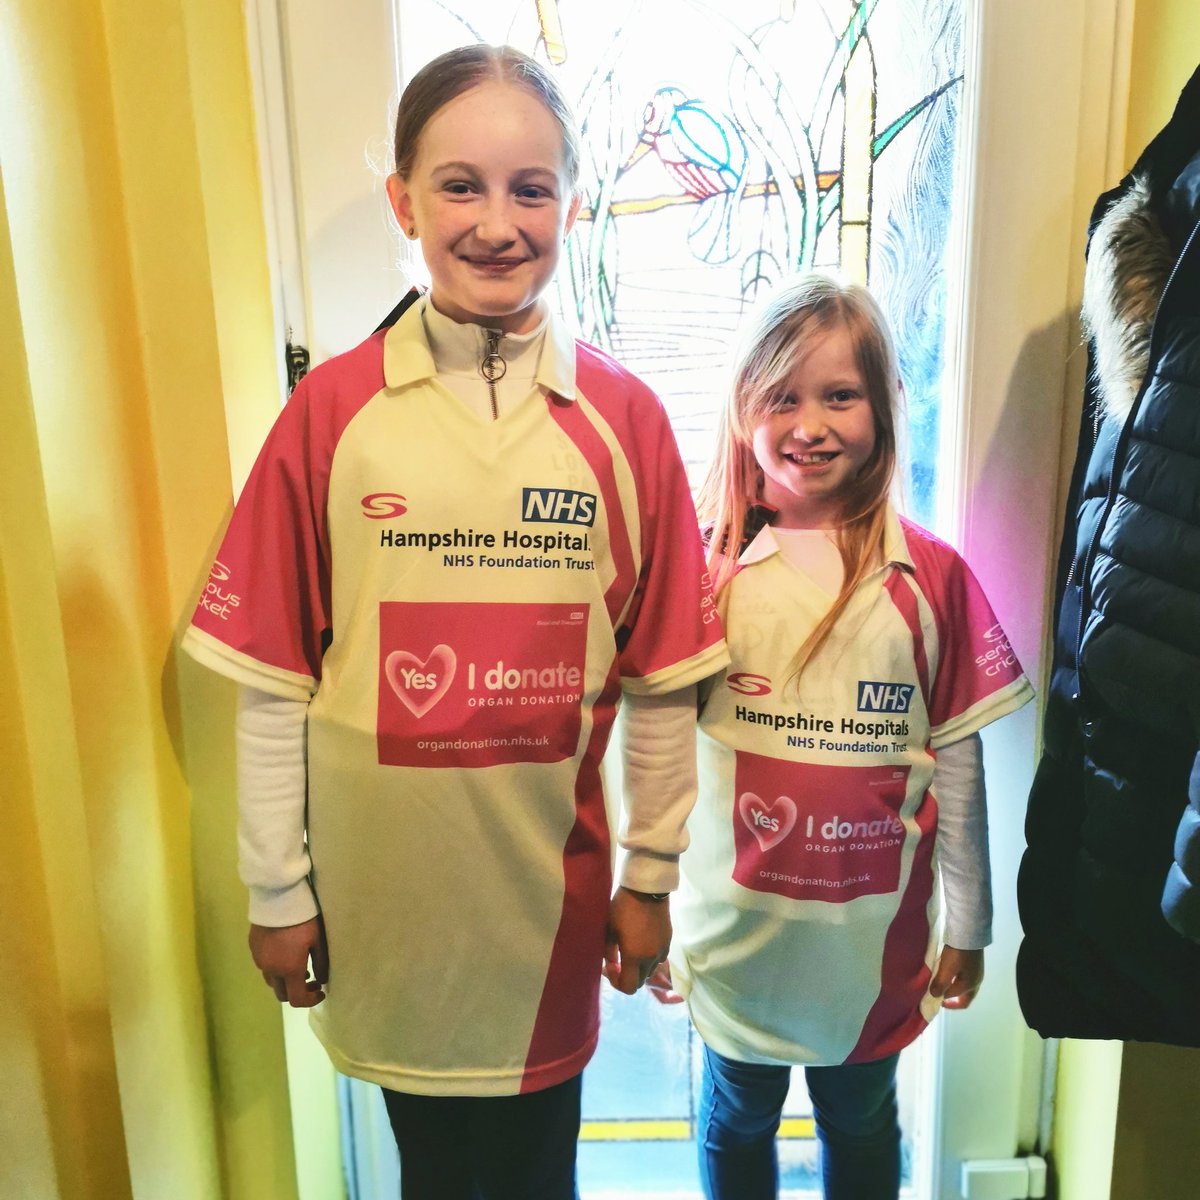 Proud dad moment, combined with proud snod moment. Isobel and libby modelling the nhsbt organdonation cricket strip. The event to kick off #organdonationweek2021 will be between  nhsbt workers and the @ETransplantC to highlight the life transforming benefits of donation.